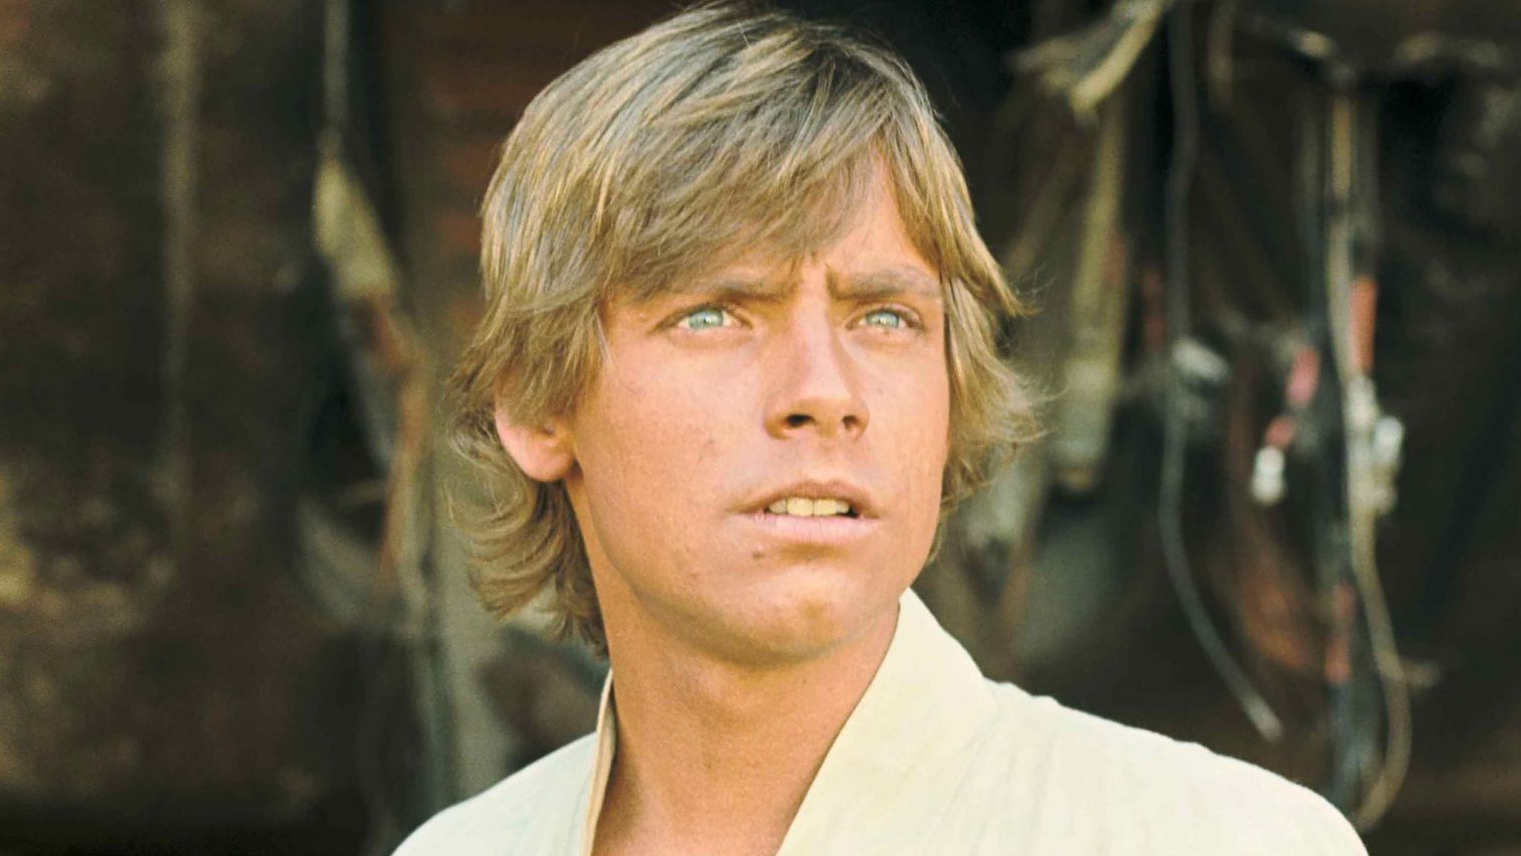 George Lucas Talked To Mark Hamill About Episode VII